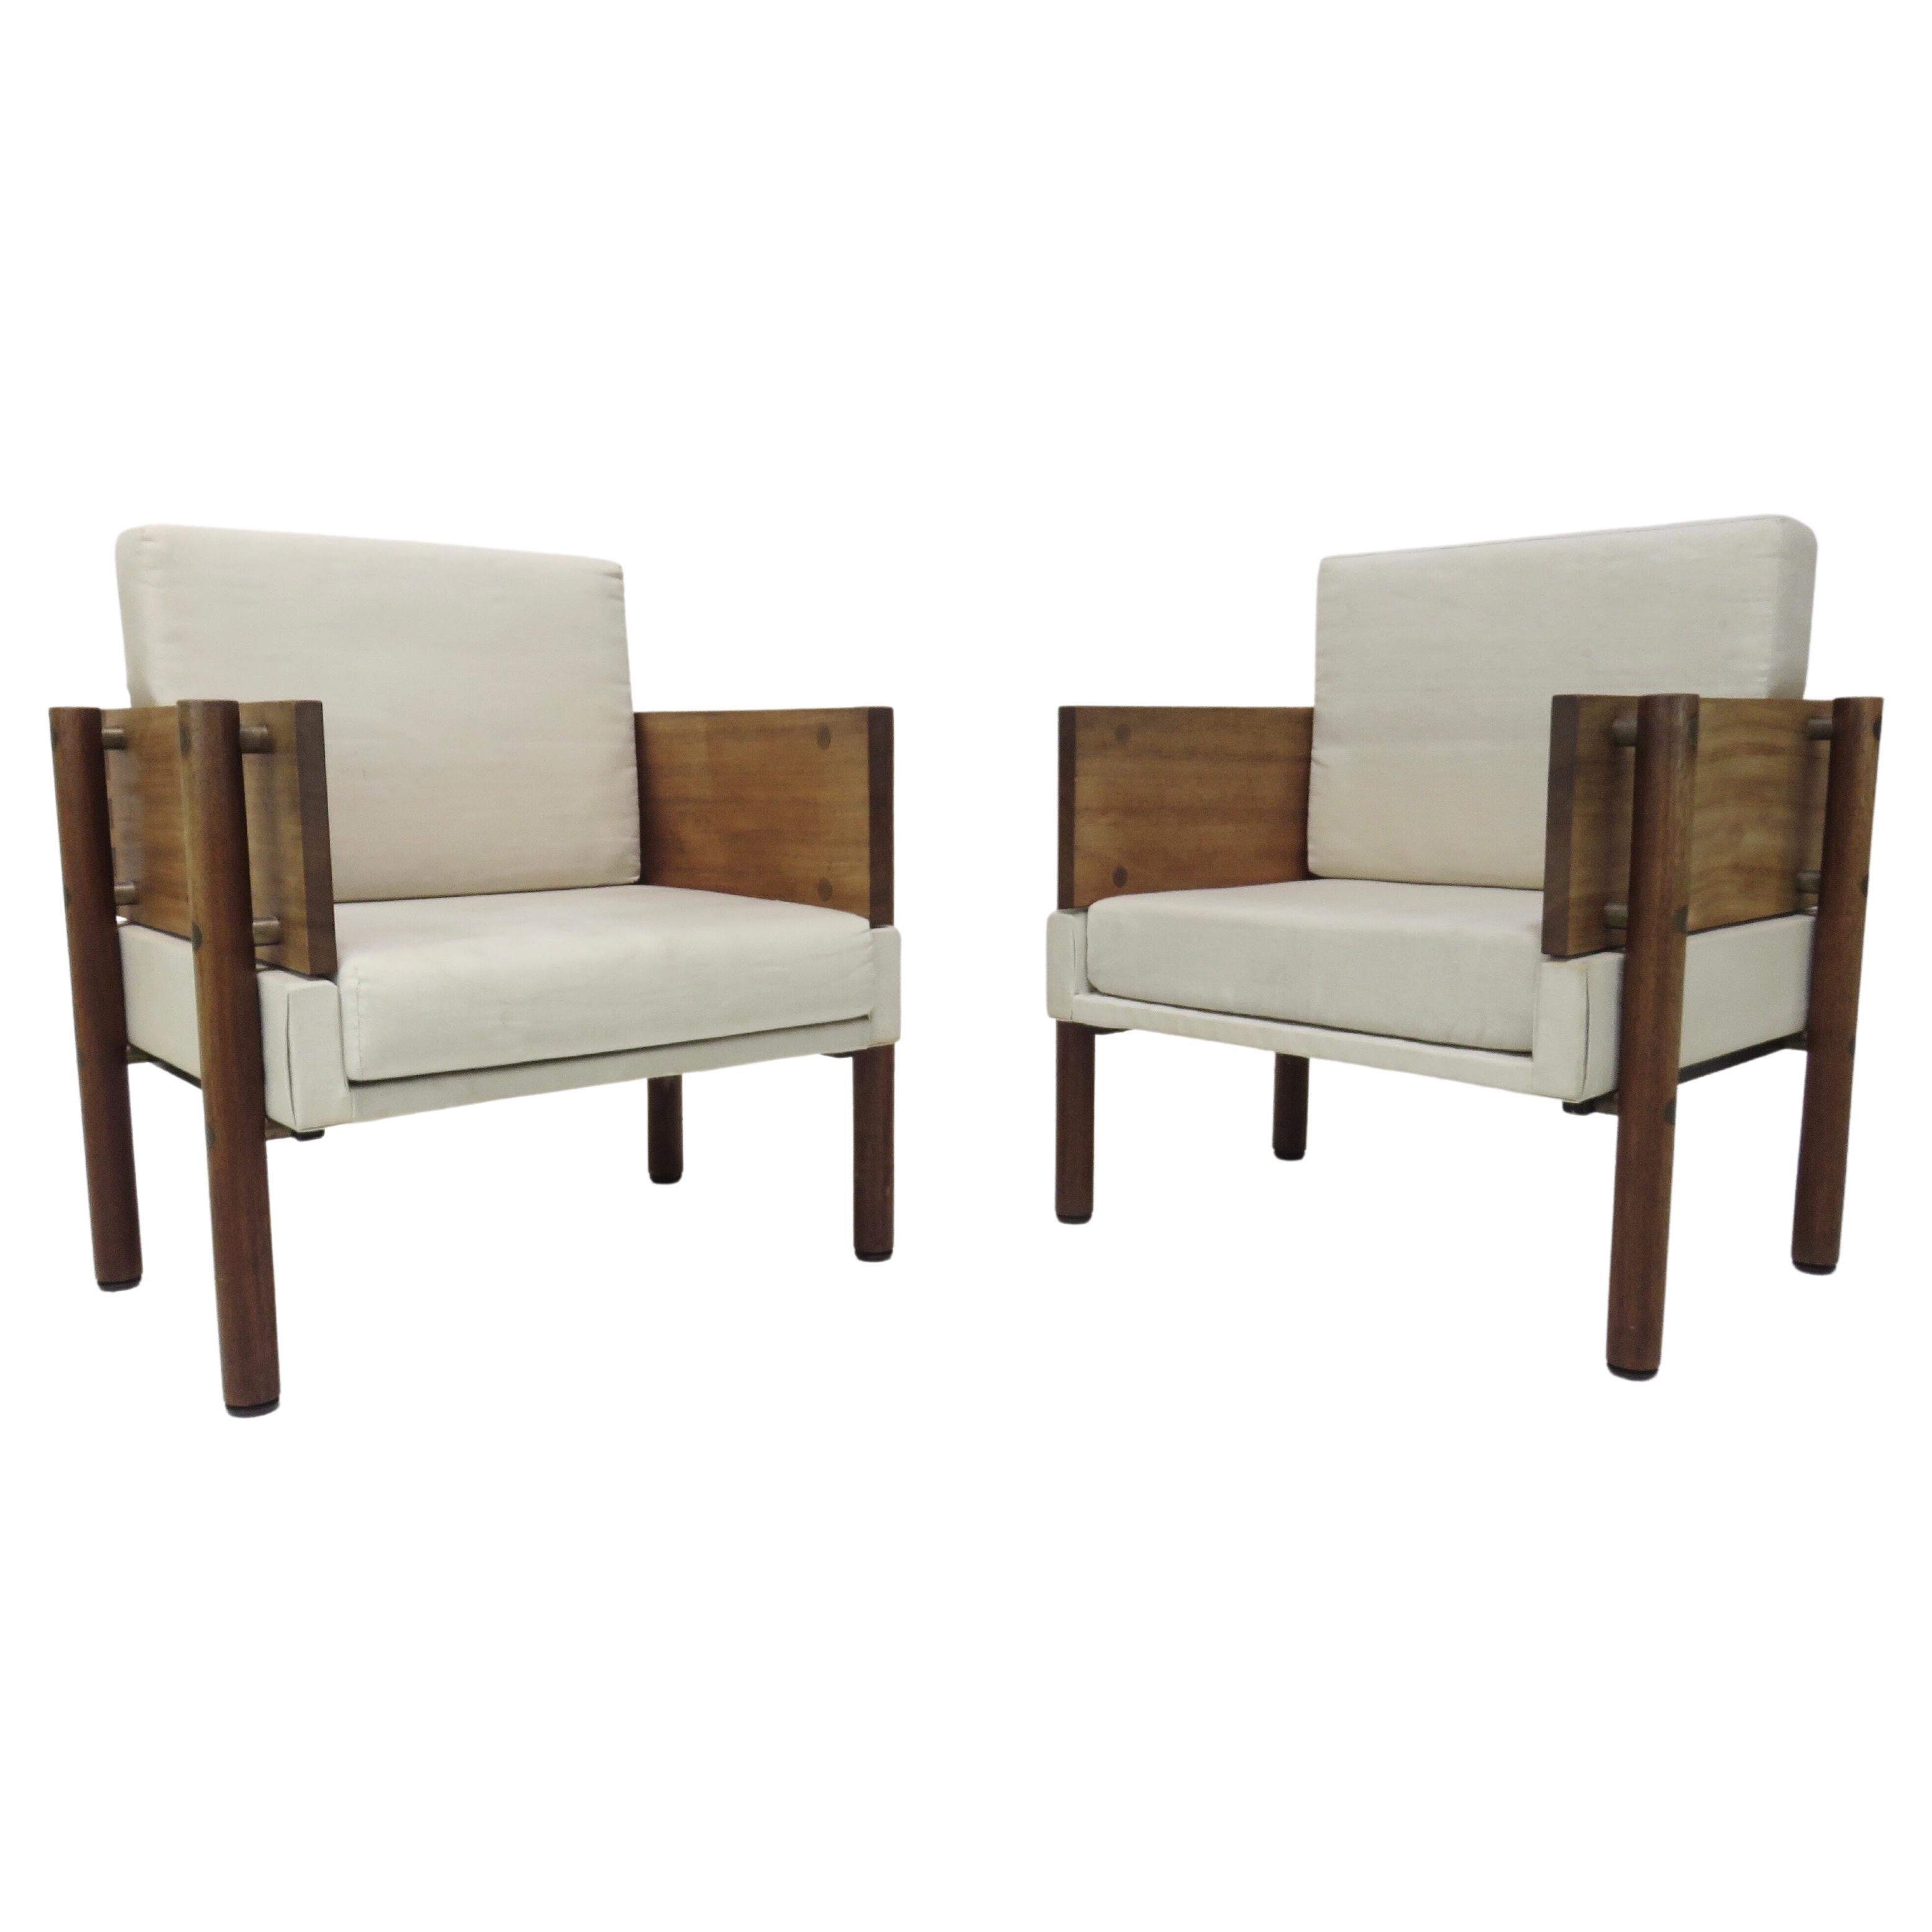 Architectural Pair of Chairs For Sale